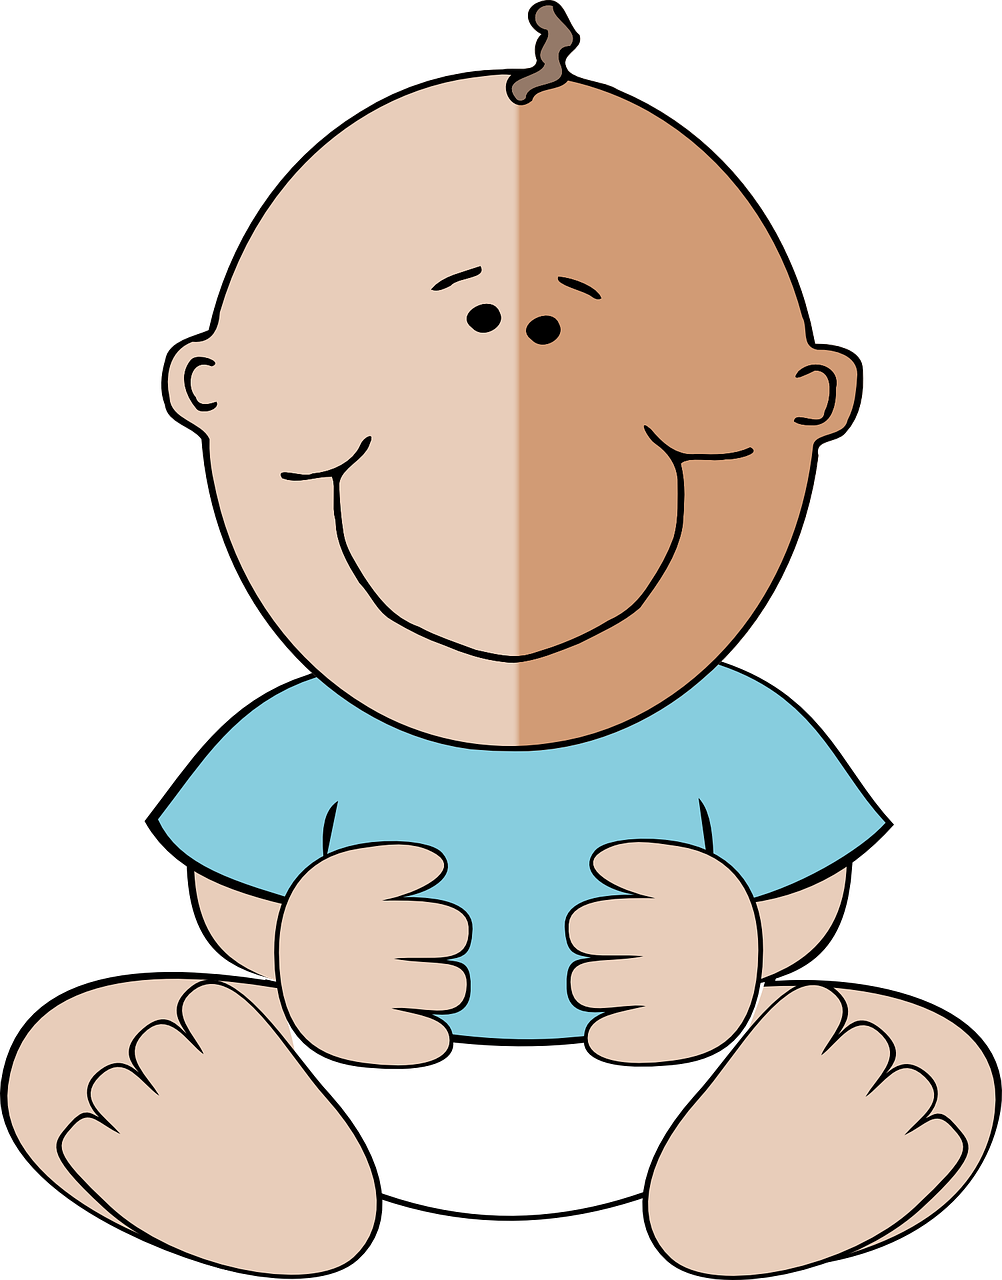 Baby Suckling Infant Cute PNG | Picpng